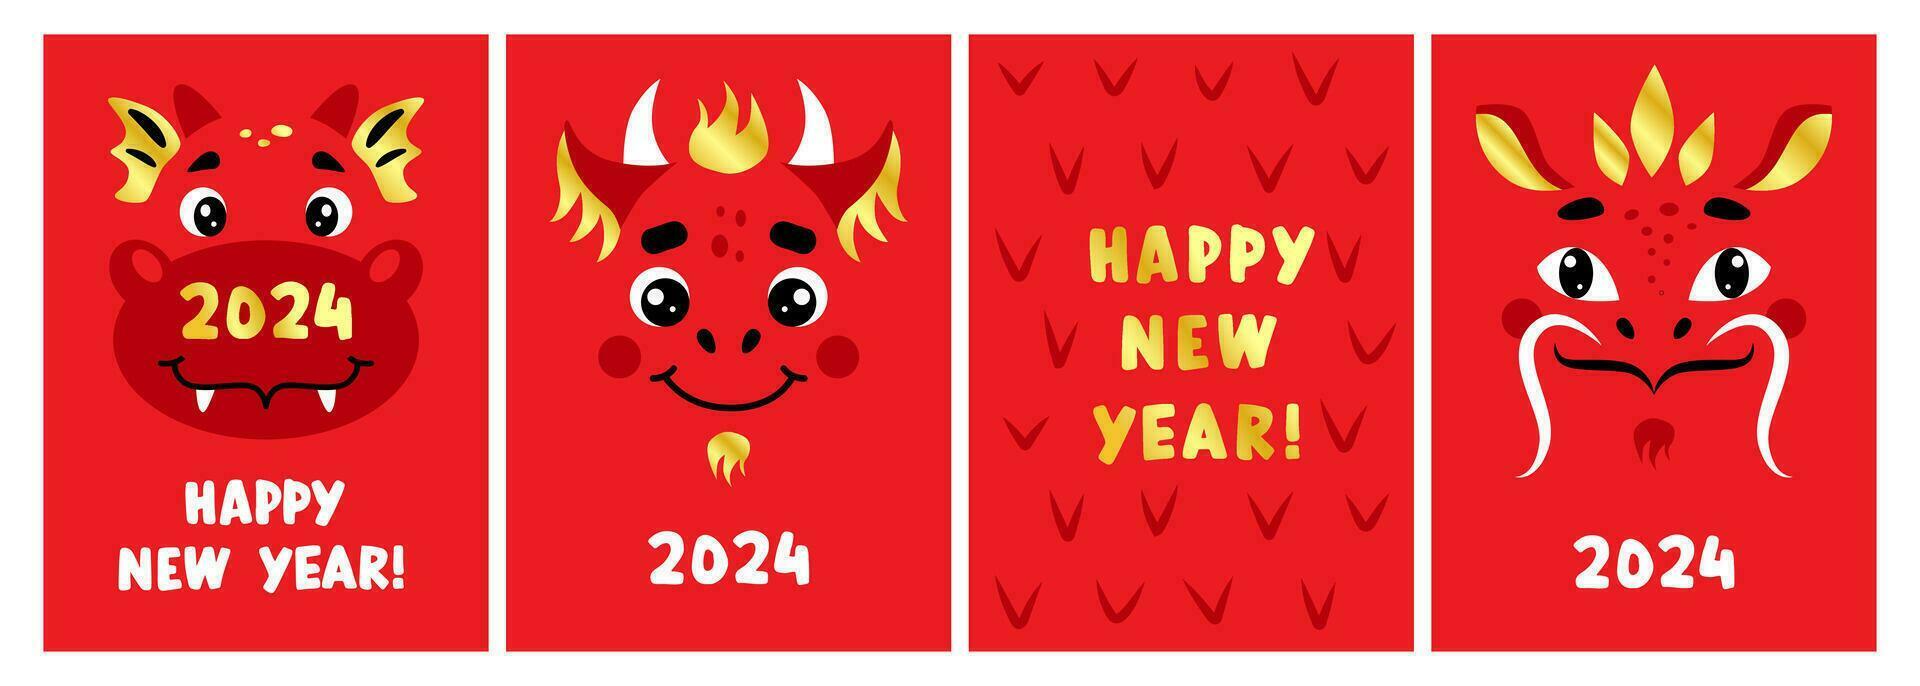 PA set of postcards Happy NEW YEAR 2024 Chinese Year of the Dragon. Cute red and gold dragon faces vector